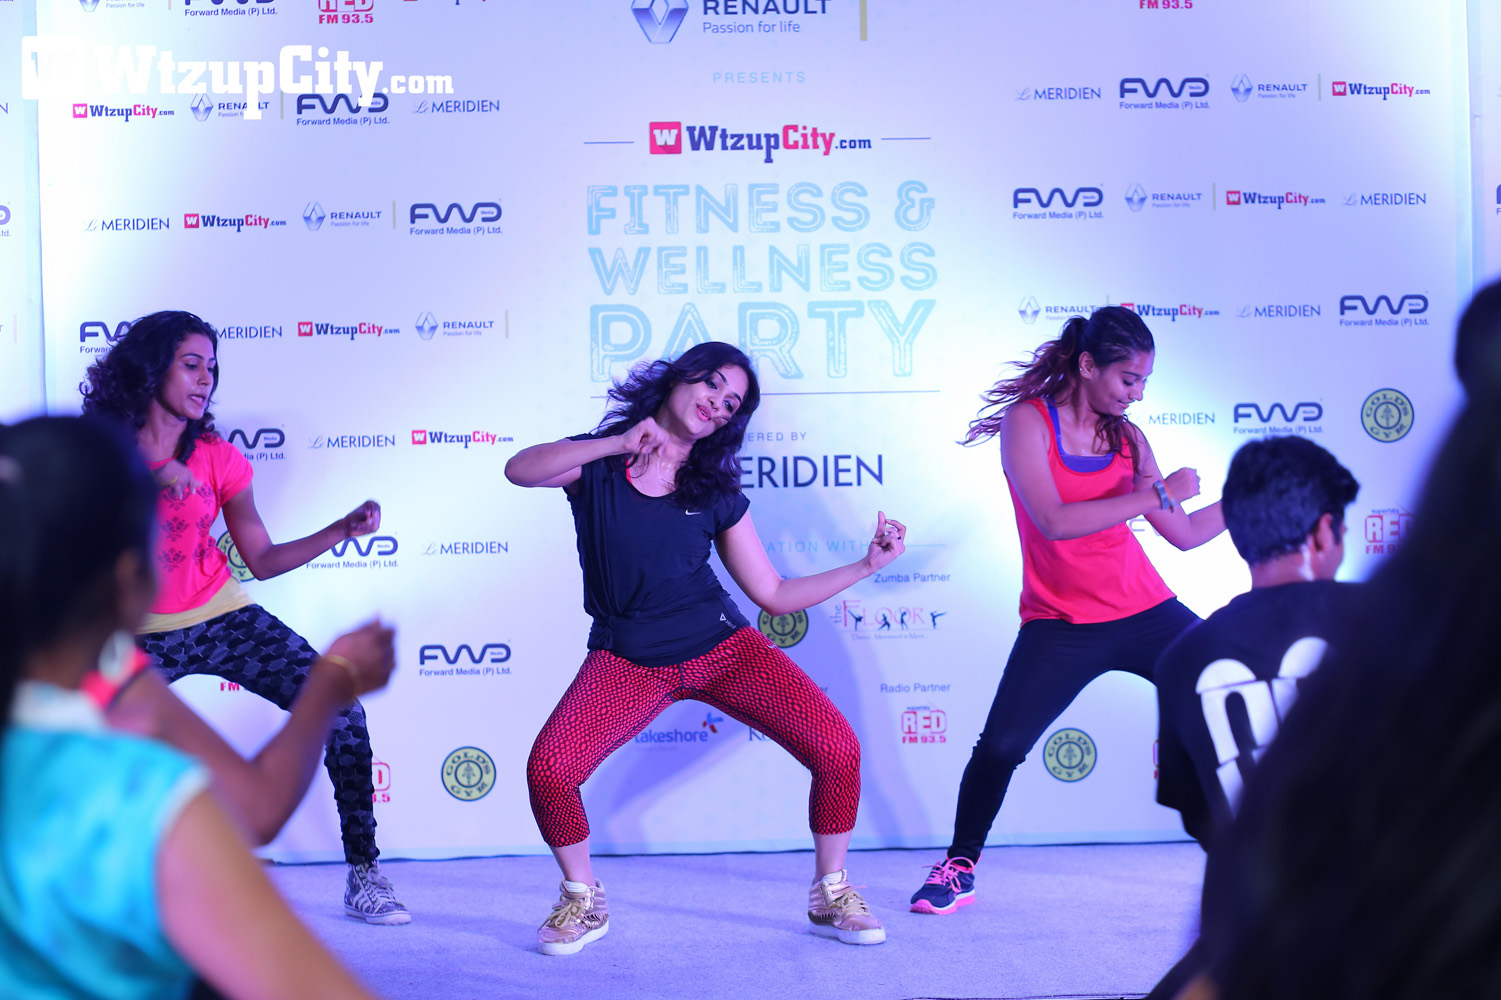 https://onlookersmedia.in/wp-content/uploads/2016/06/WtzupCity-Fitness-and-Wellness-Party-June-2016-30.jpg